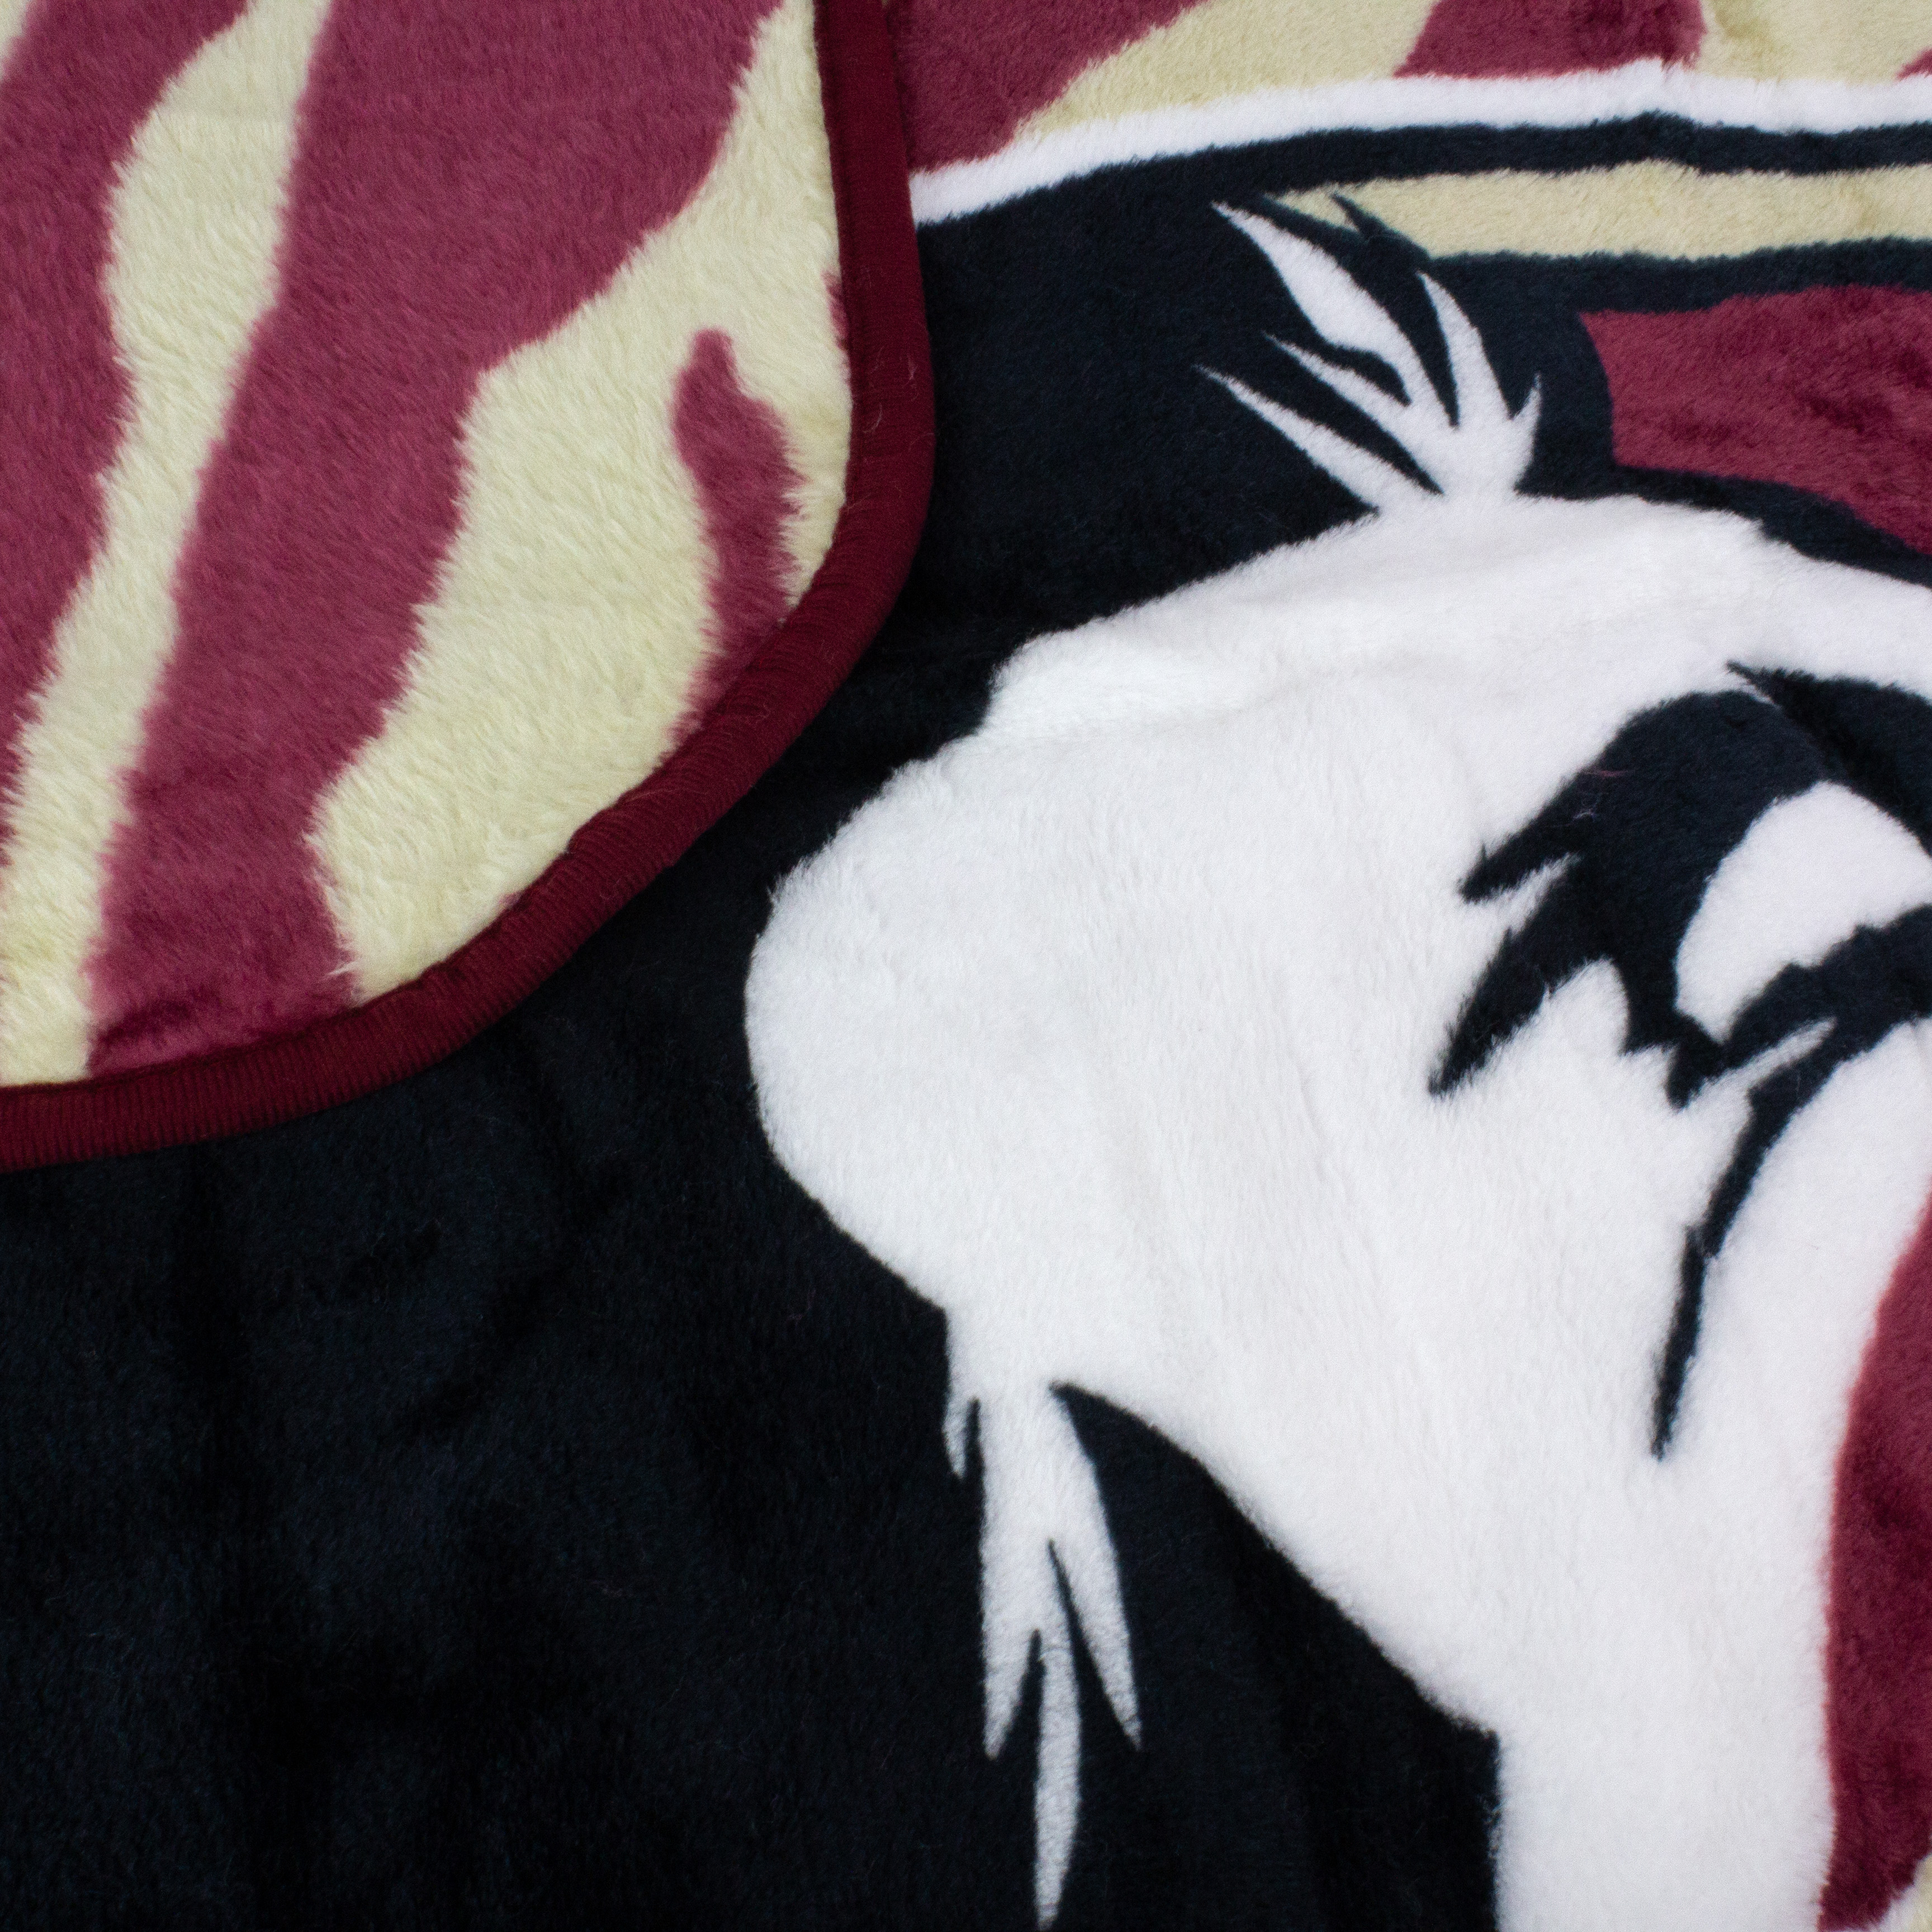 College Covers Everything Comfy Florida State Seminoles Soft Raschel Throw Blanket, 60" x 50" - image 5 of 8